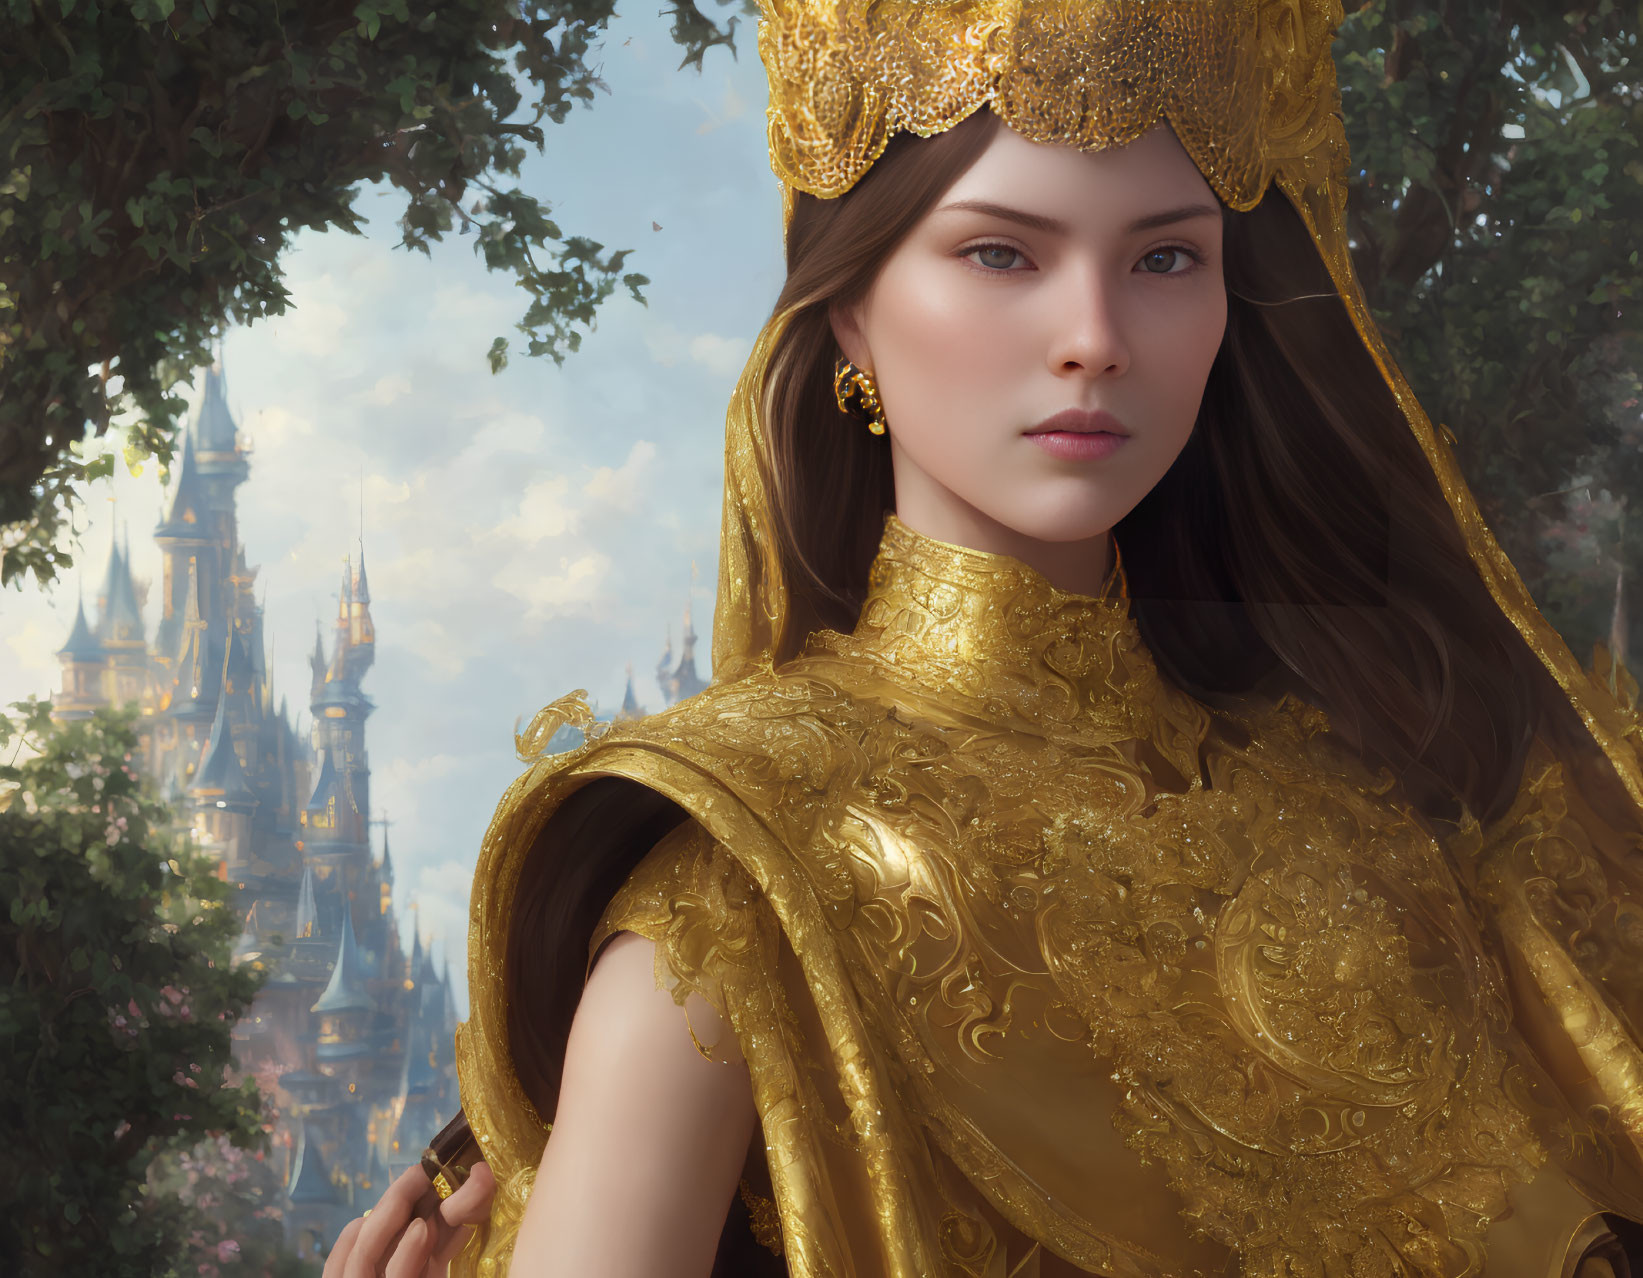 Regal woman in gold royal attire with crown, serene expression, blurred castle backdrop